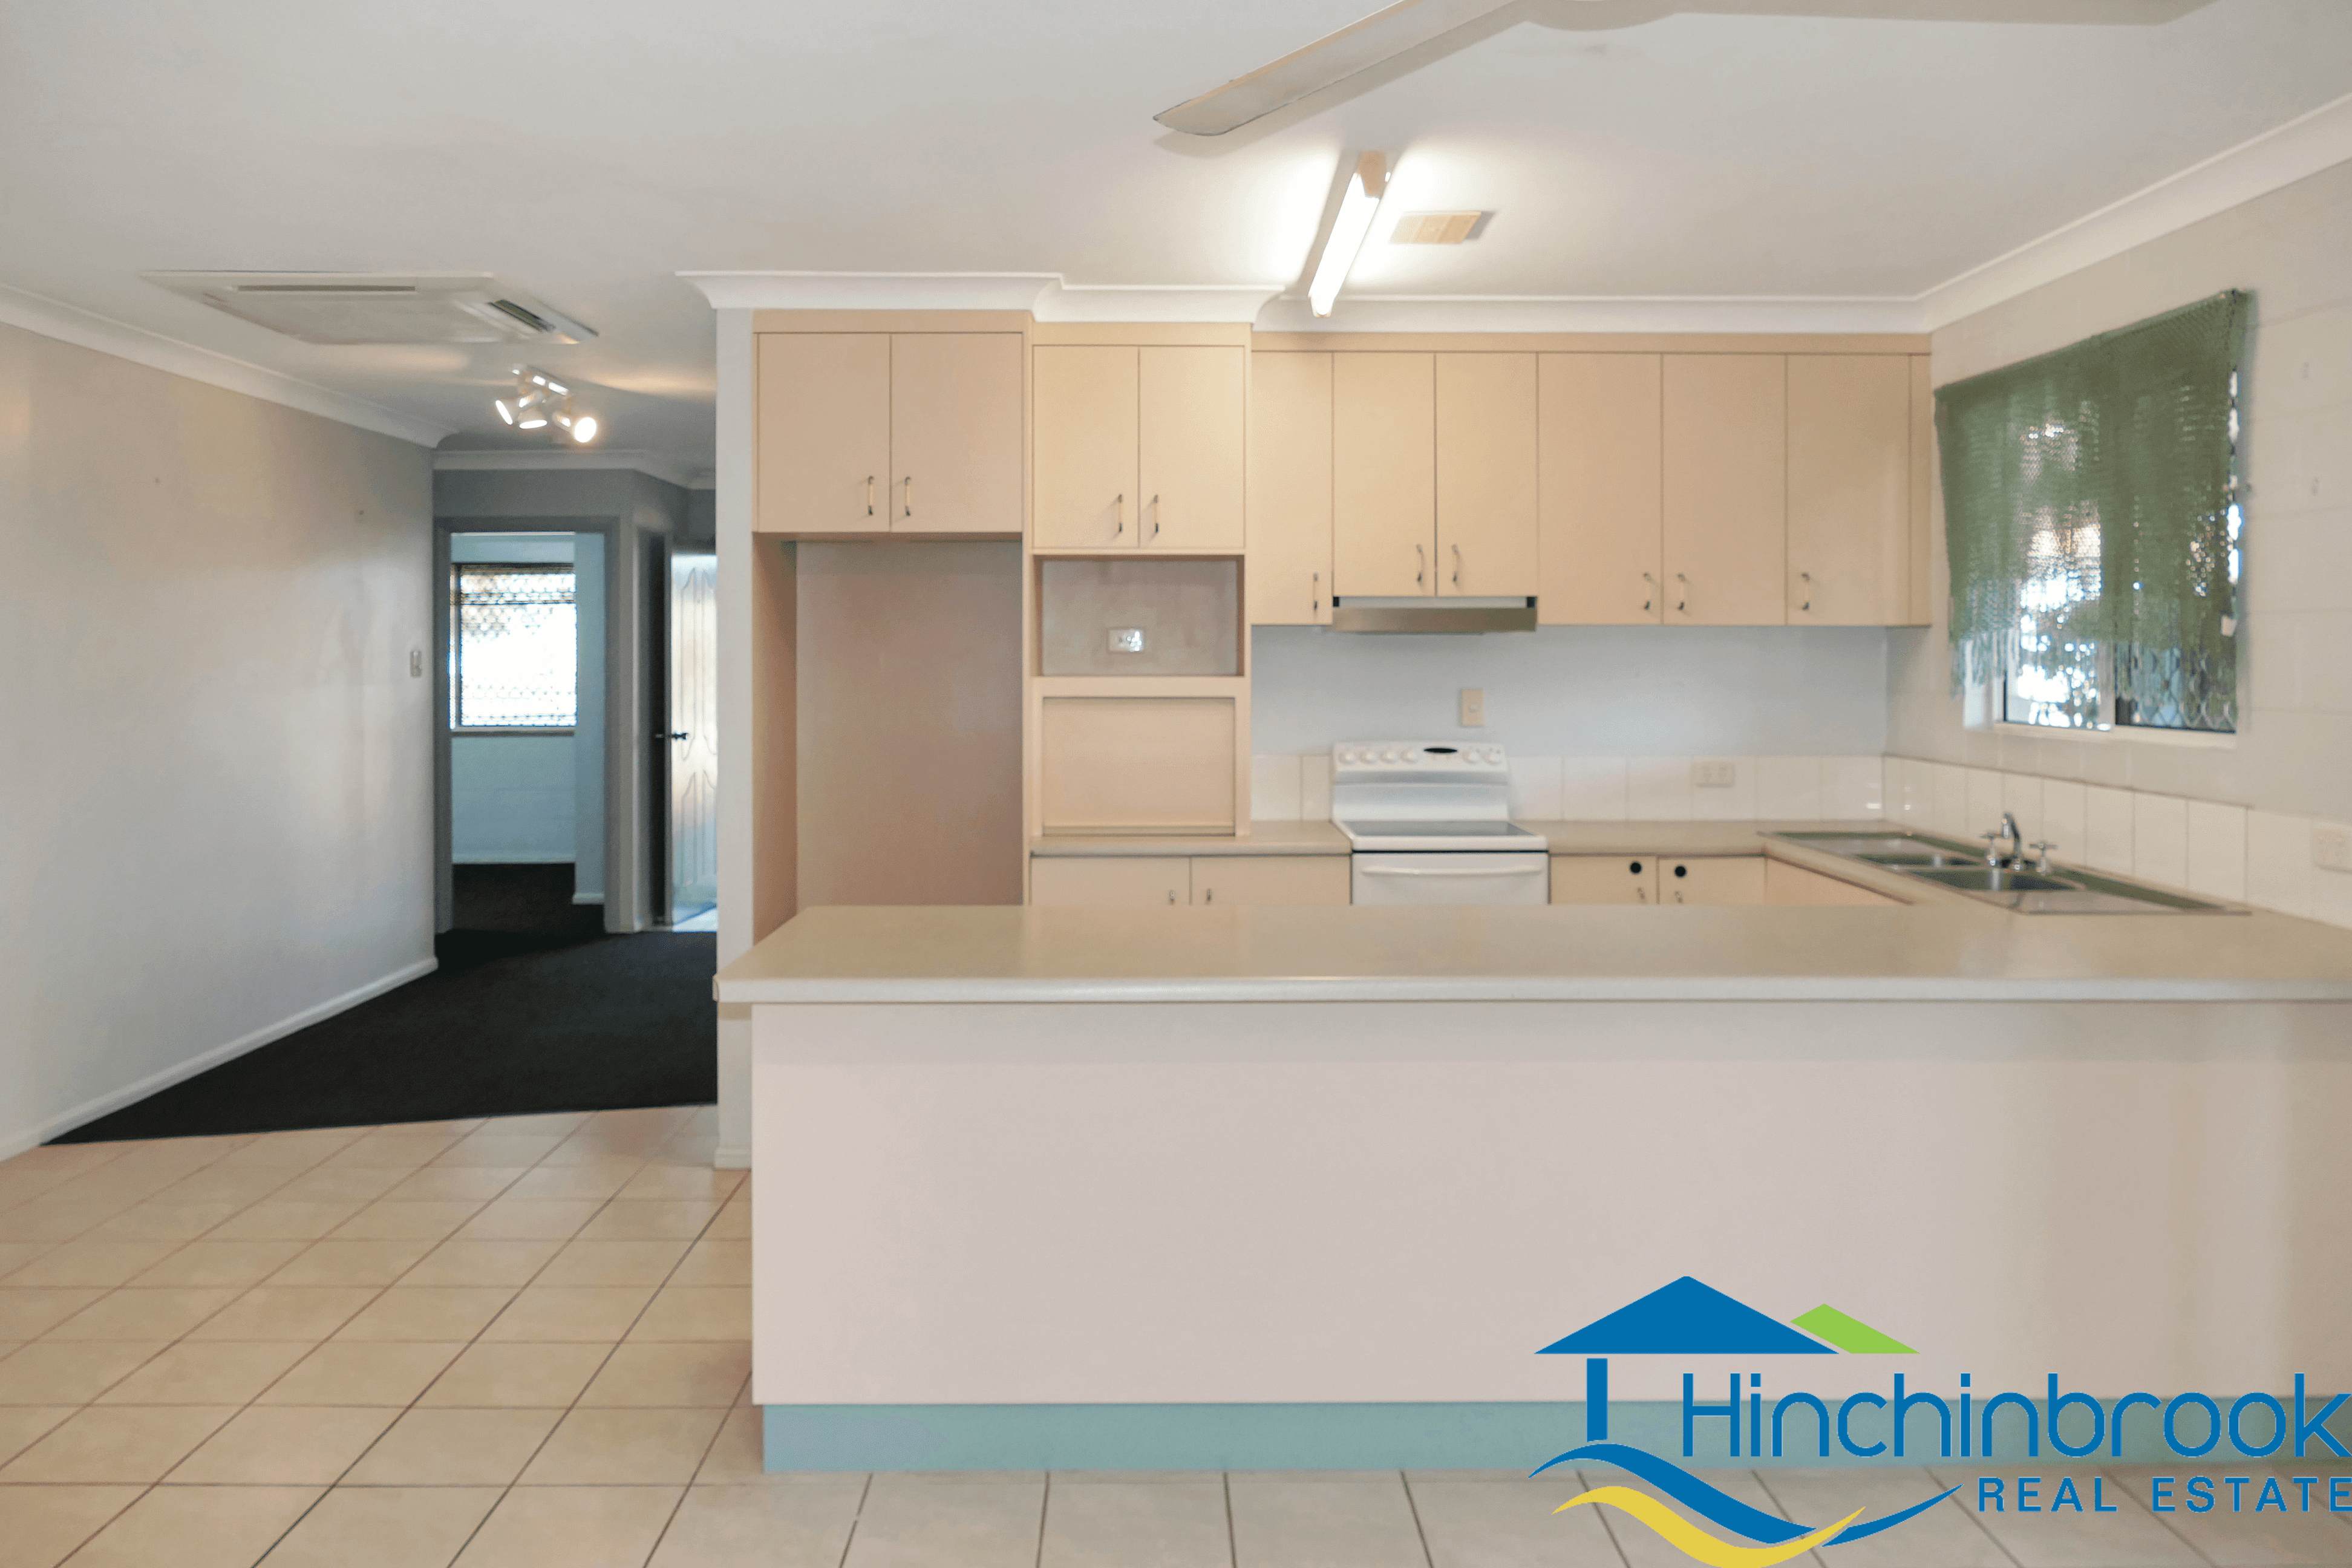 16 Griffin Court, Cardwell, QLD 4849